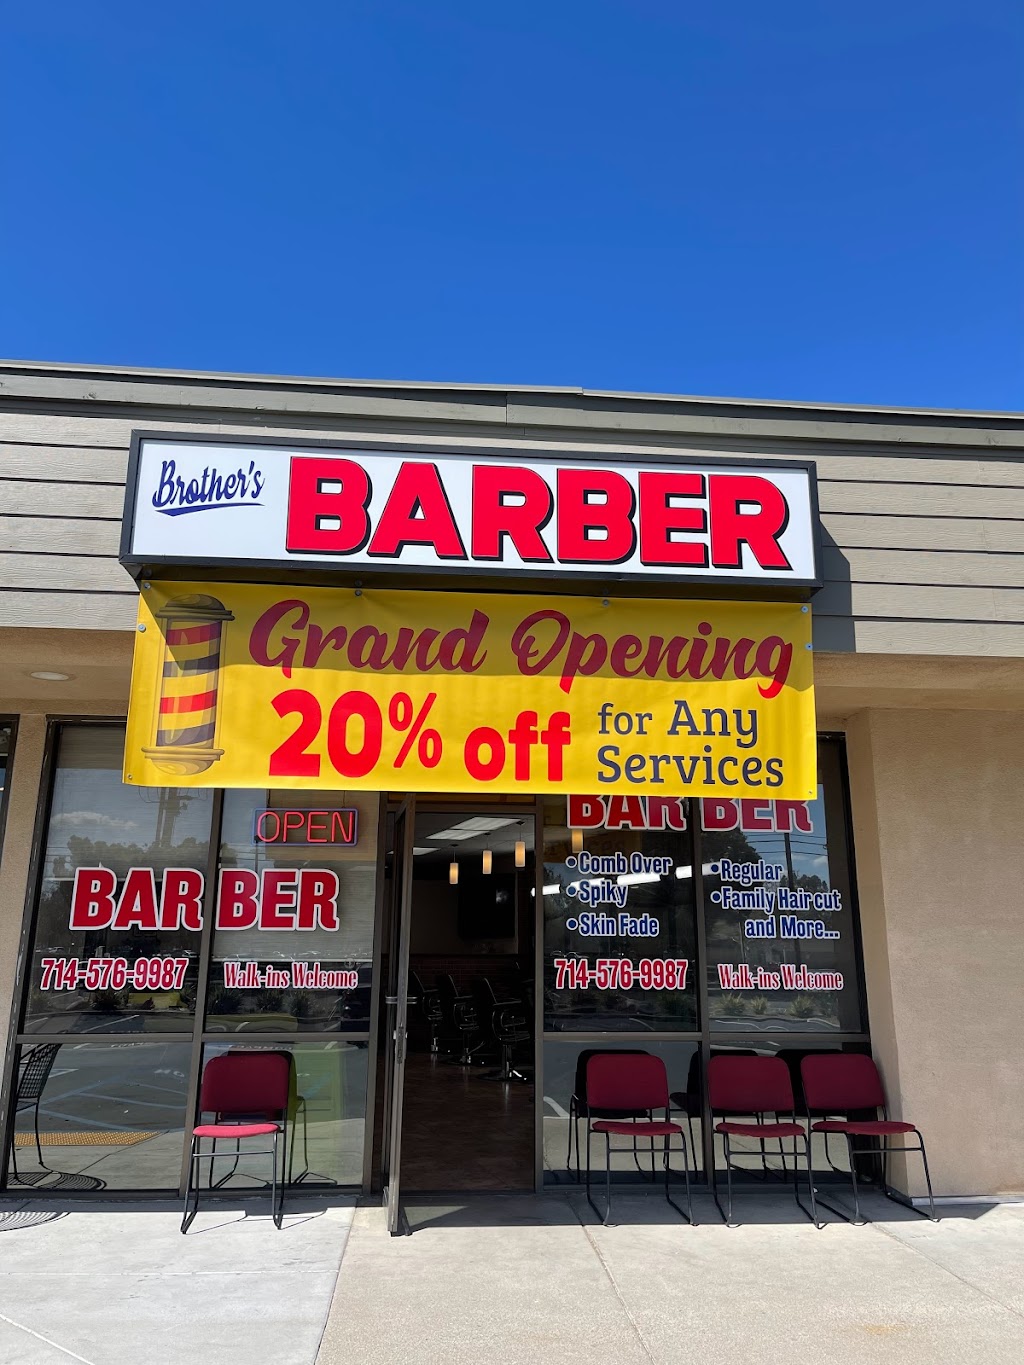 Brothers Barber Shop | 1525 N Placentia Ave # E, Placentia, CA 92870, USA | Phone: (714) 576-9987